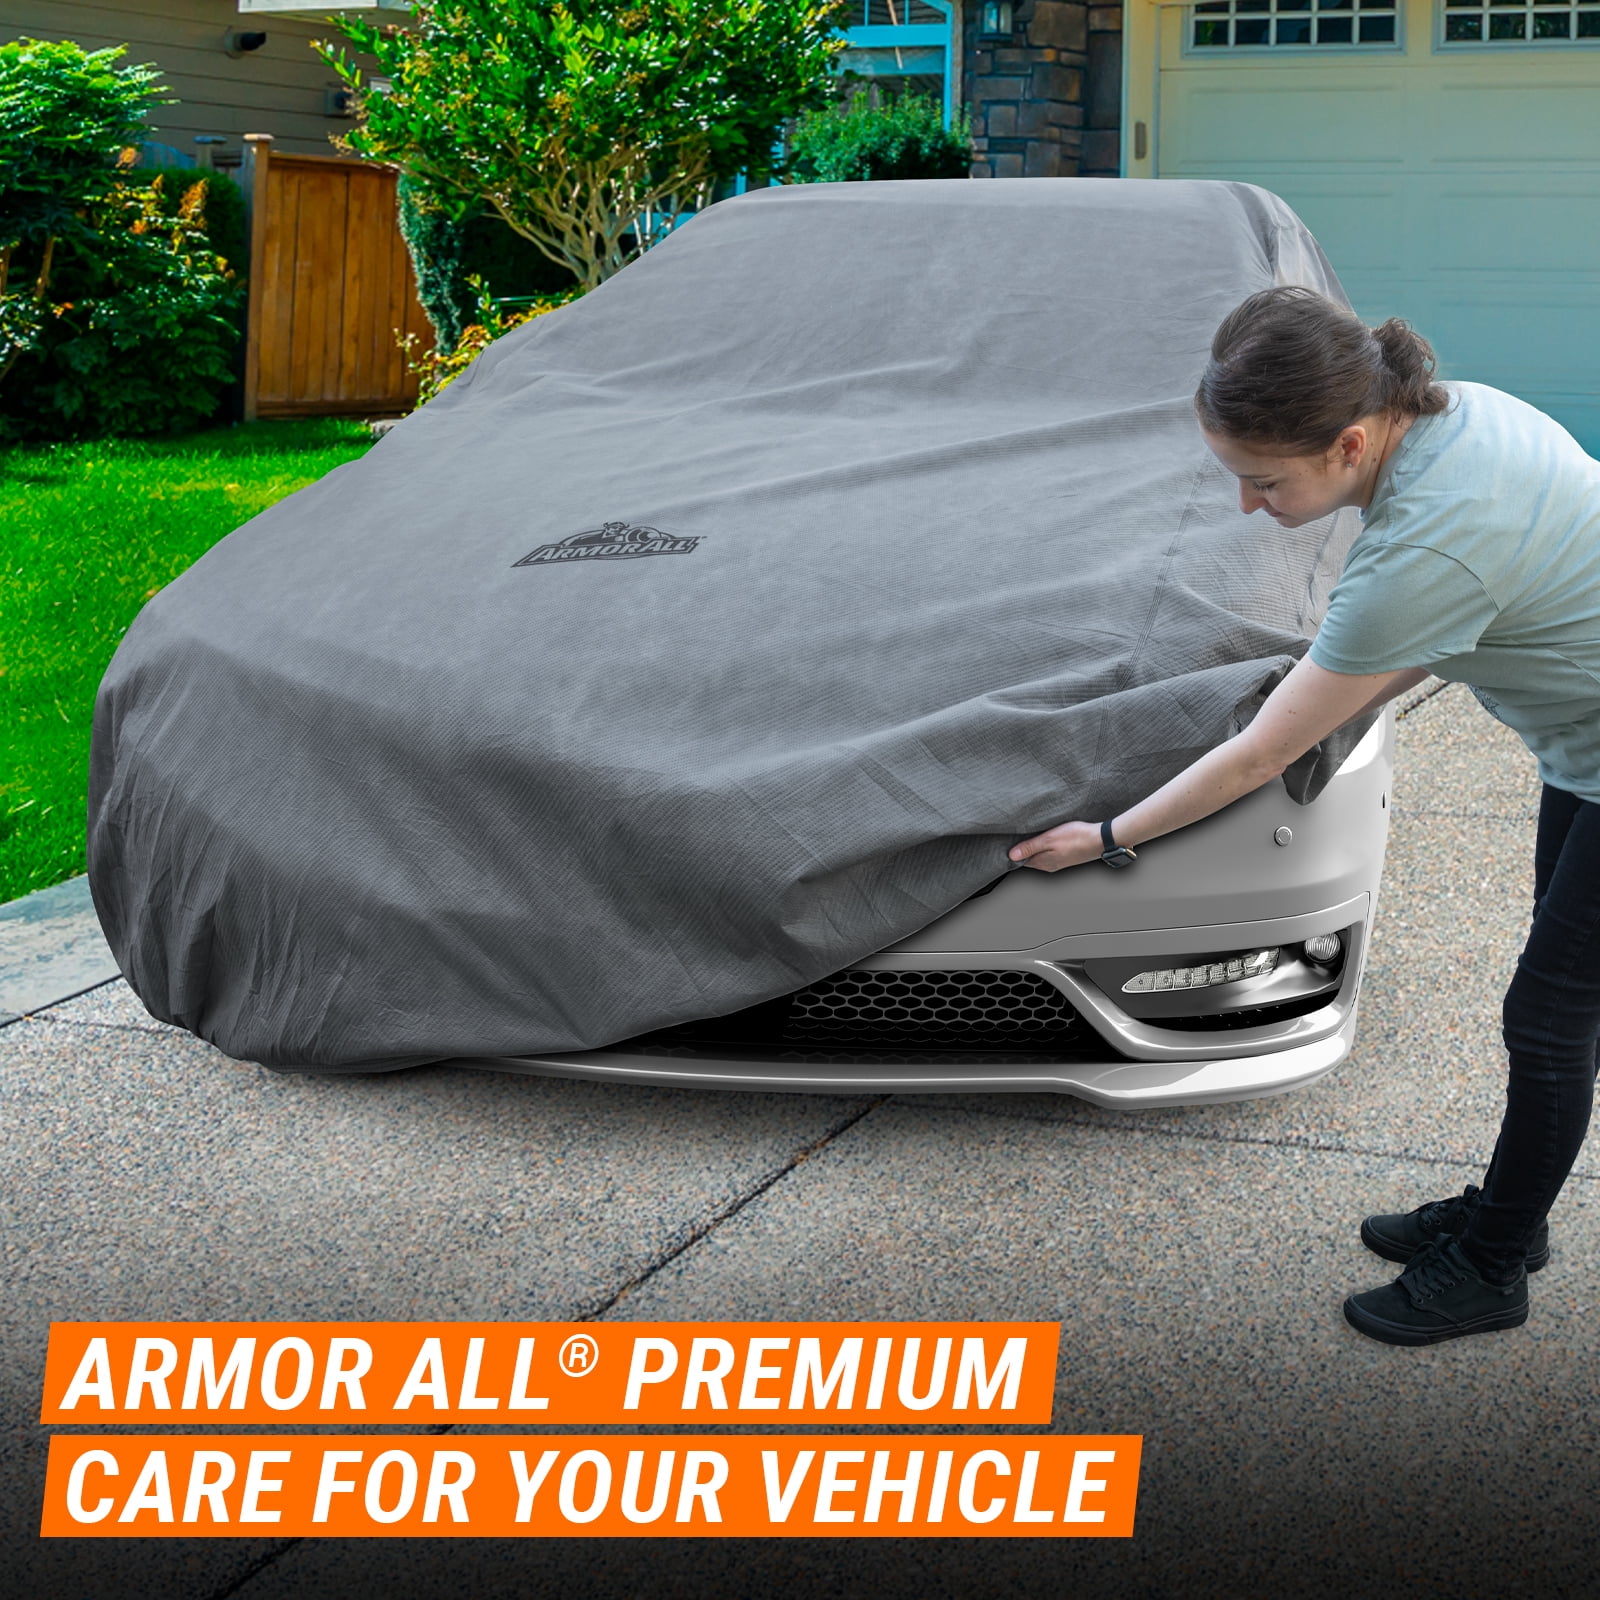 Armor All Car Cover, Heavy Duty All Weather Protection, Fits Sedan Length  up to 203